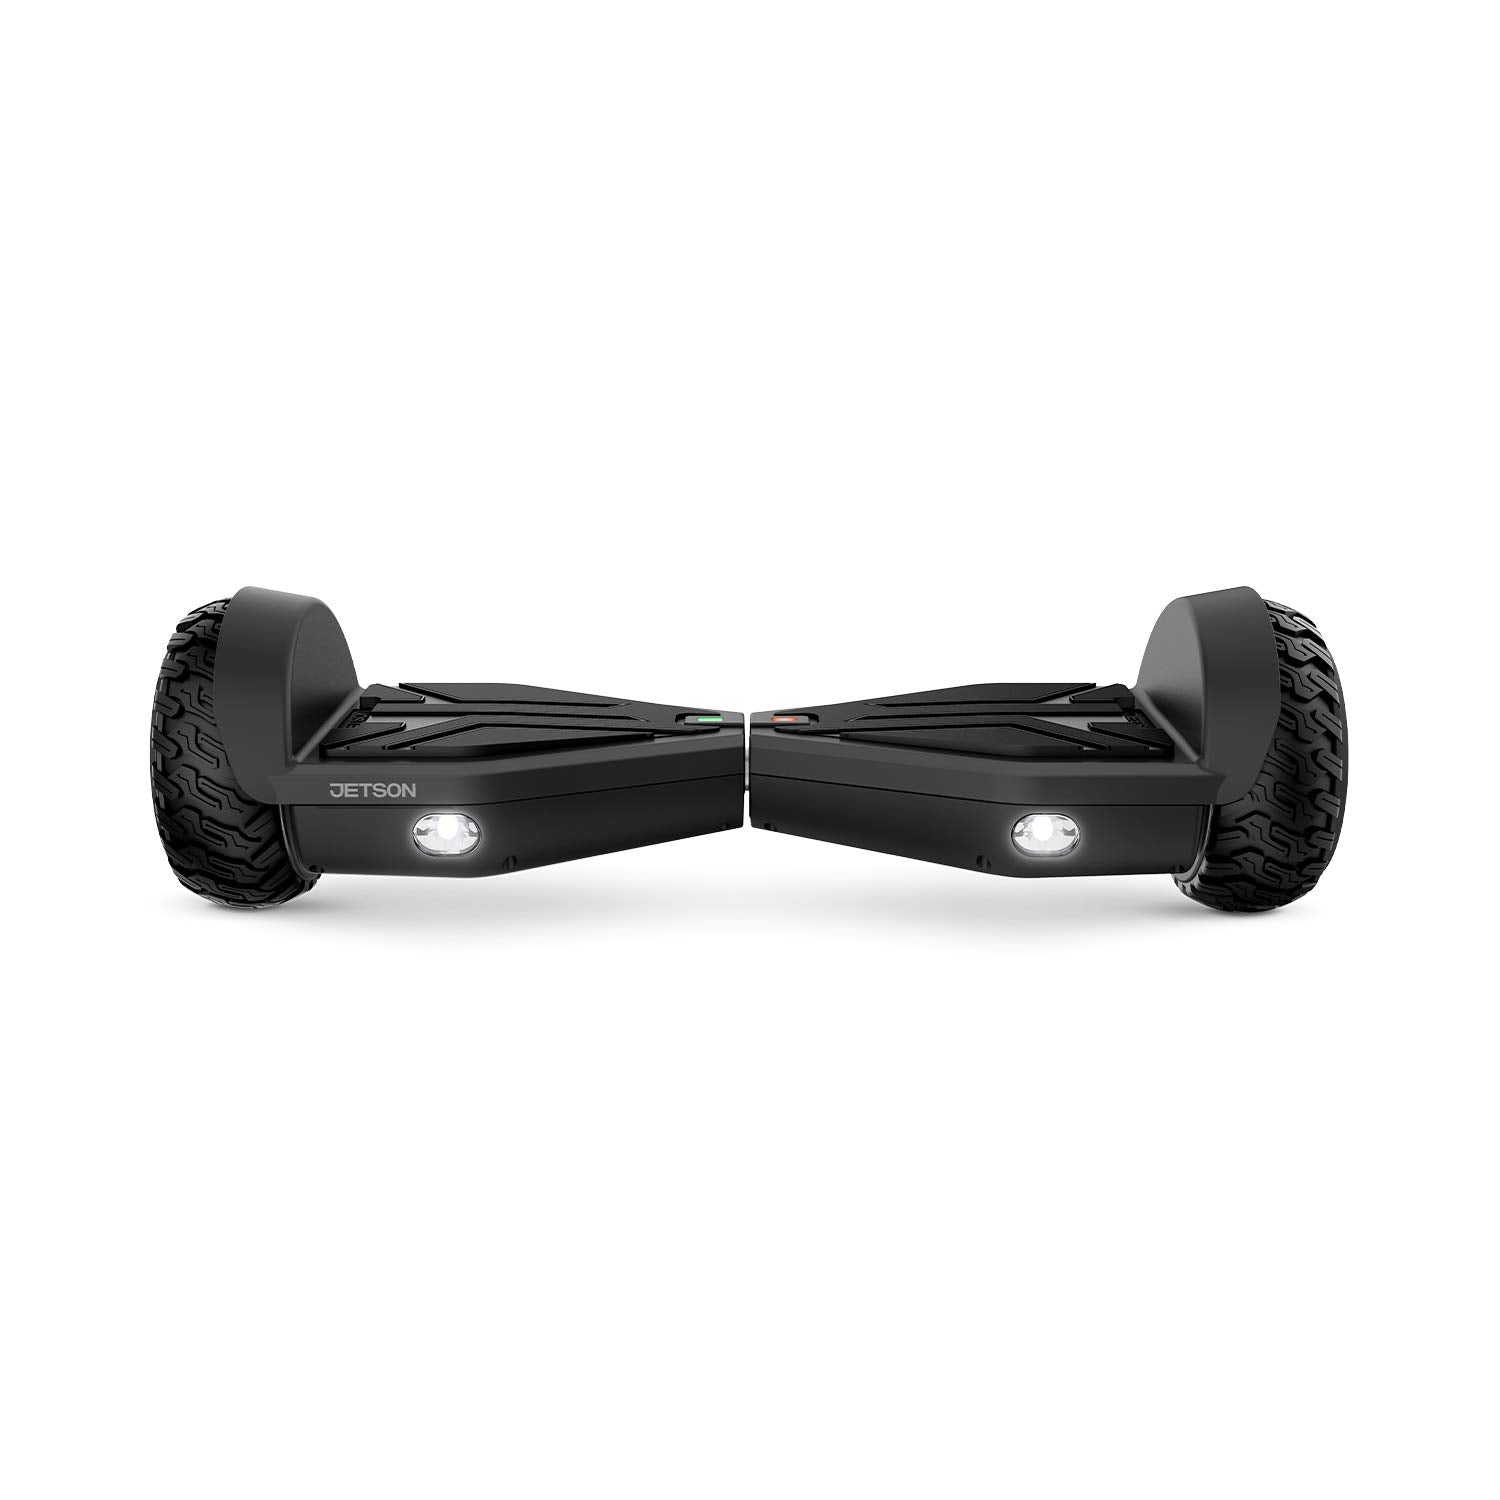 Jetson Spin All Terrain Hoverboard with LED Lights | Anti Slip Grip Pads | Self Balancing Hoverboard with Active Balance Technology | Range of Up to 7 Miles, Ages 13+